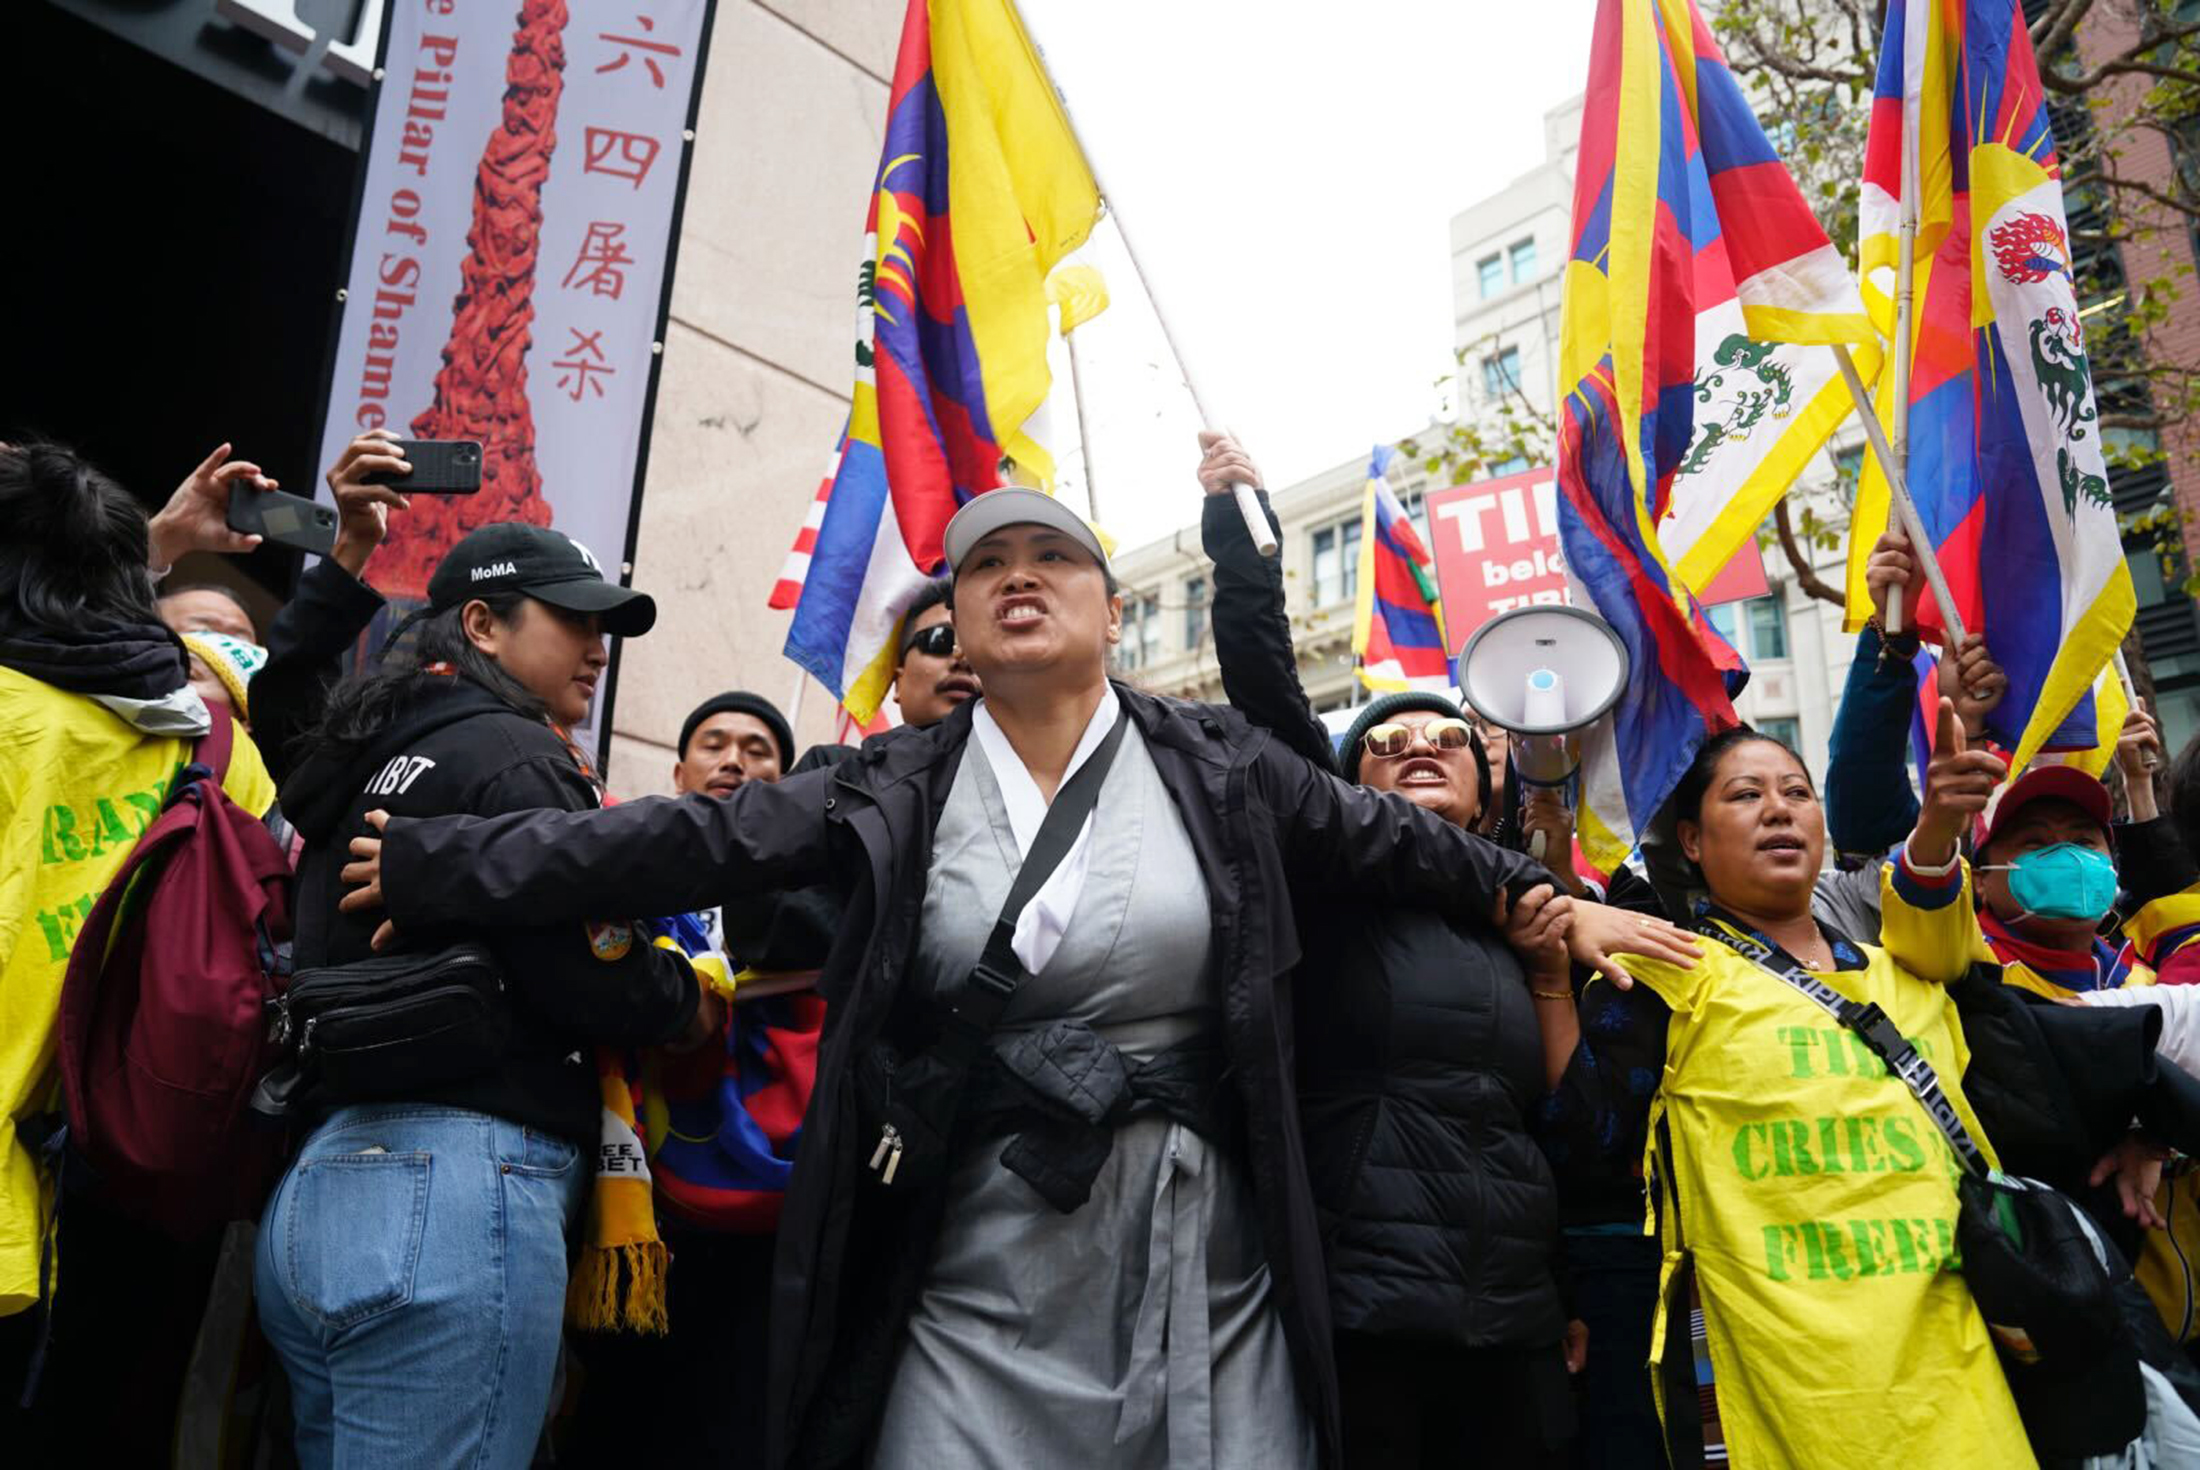 A person screams into into the distance during a protest with Tibetan flags in the background.